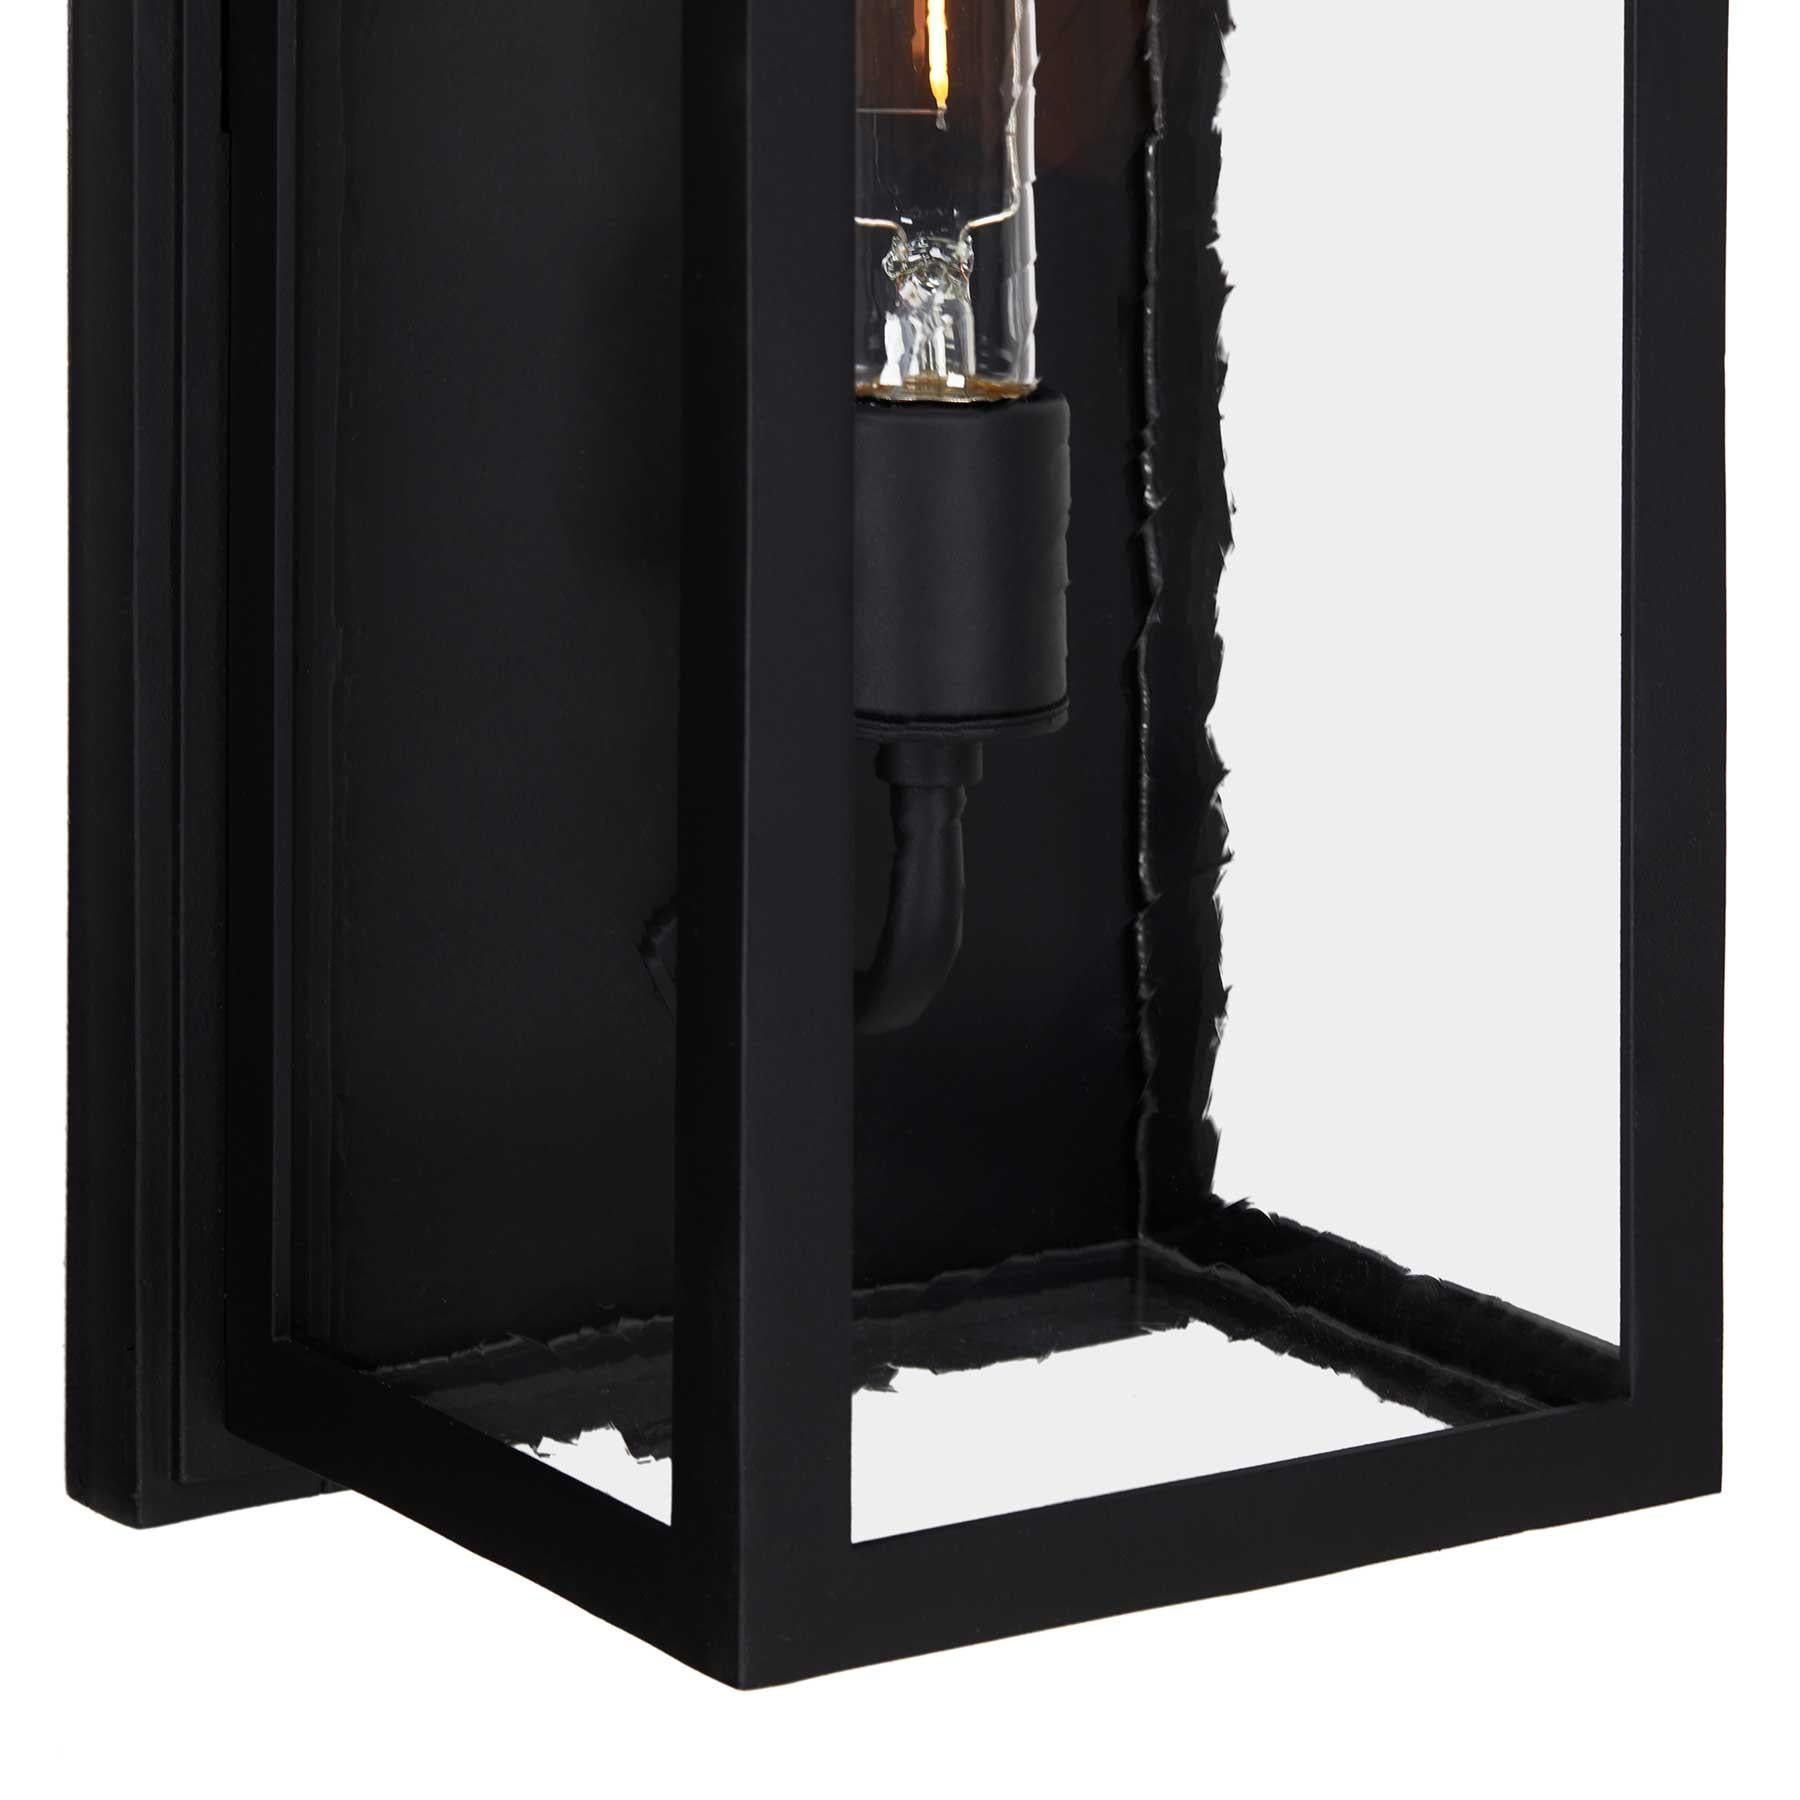 Forged Contemporary Rectangular Exterior Wrought Iron Lantern, Antique Glass For Sale